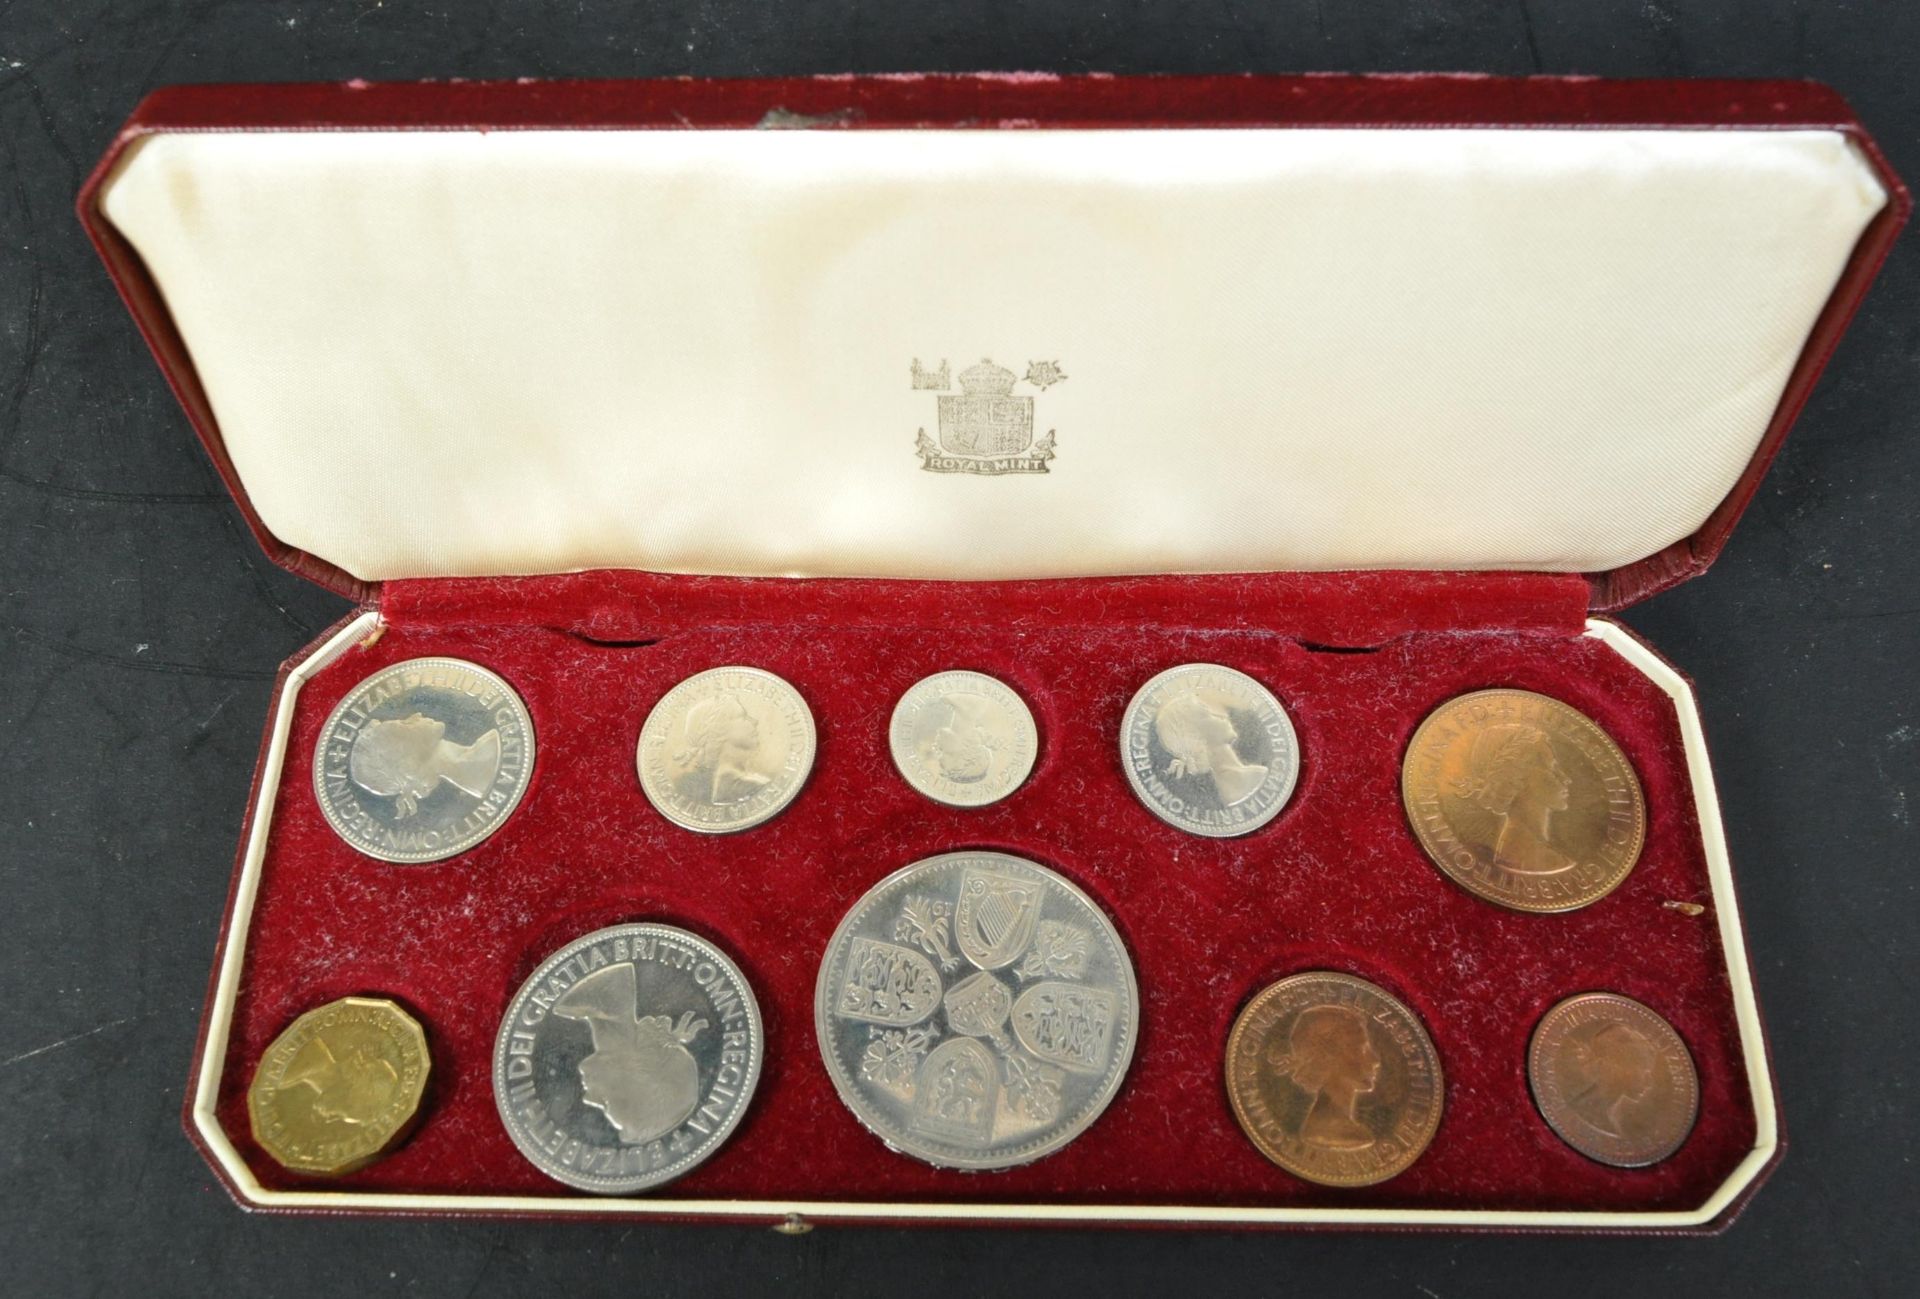 VINTAGE 1953 ENGLISH COINAGE SET IN RED LEATHER CASE - Image 4 of 4